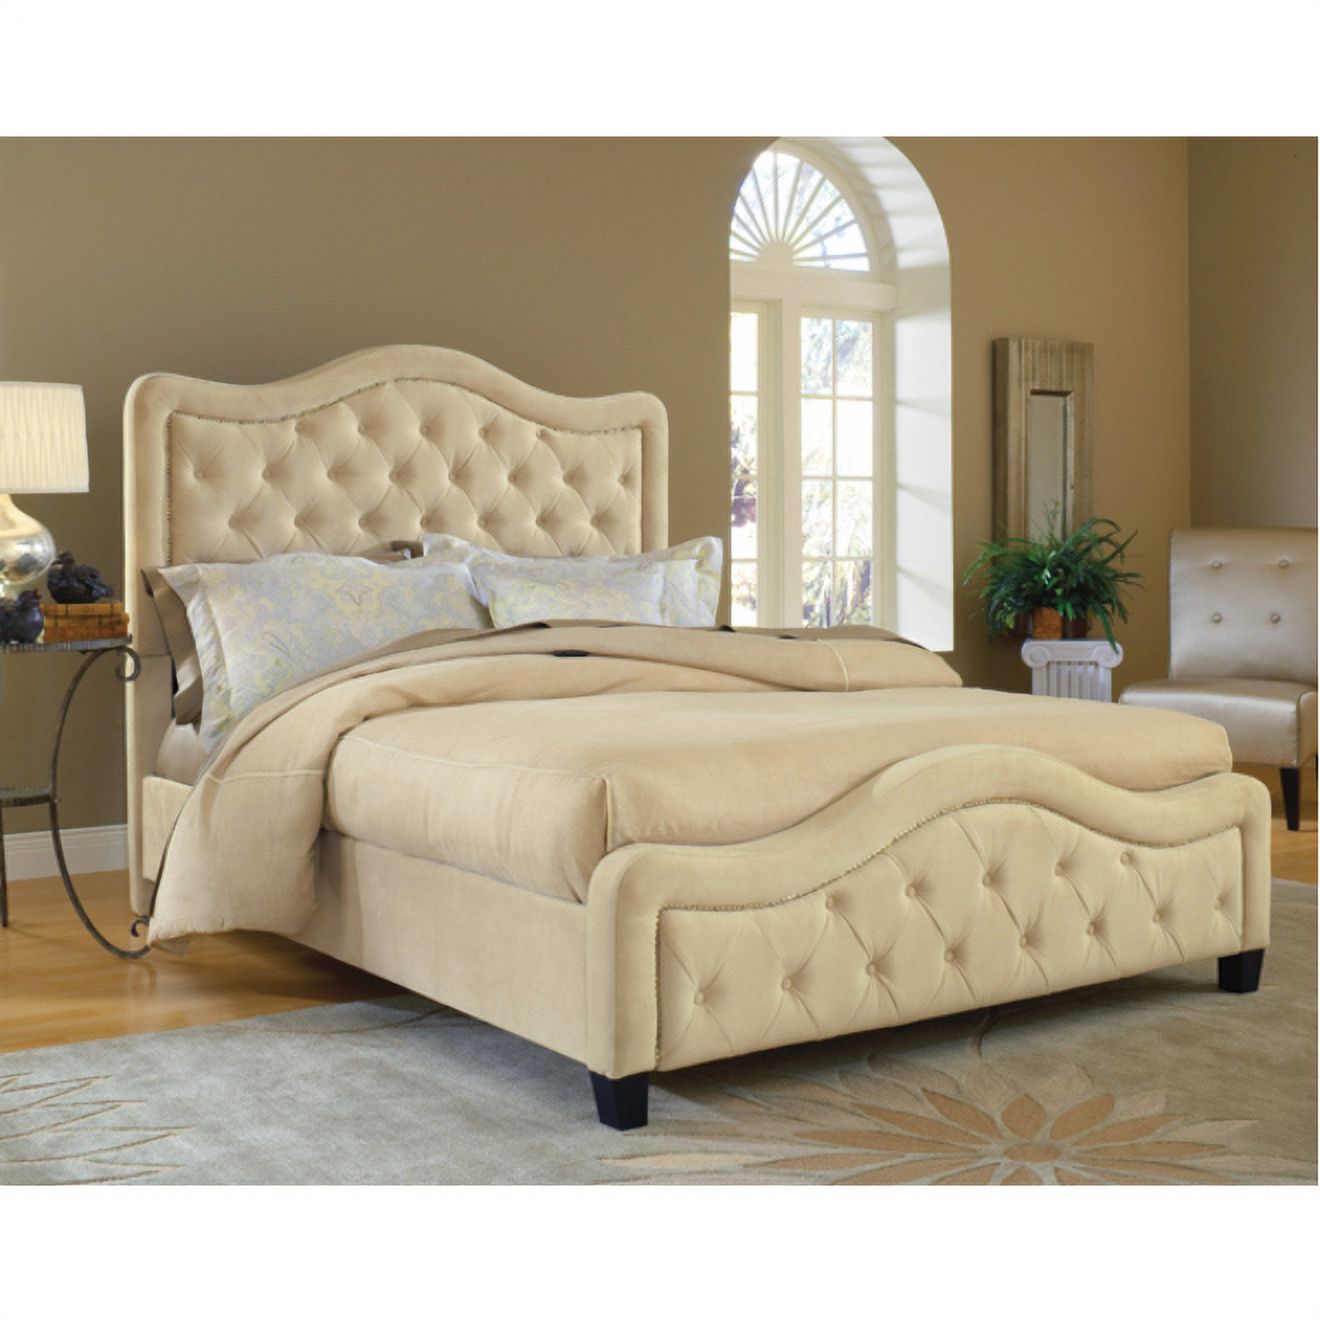 Hillsdale Furniture Trieste Upholstered Panel Bed, Multiple Sizes and Colors - image 1 of 2